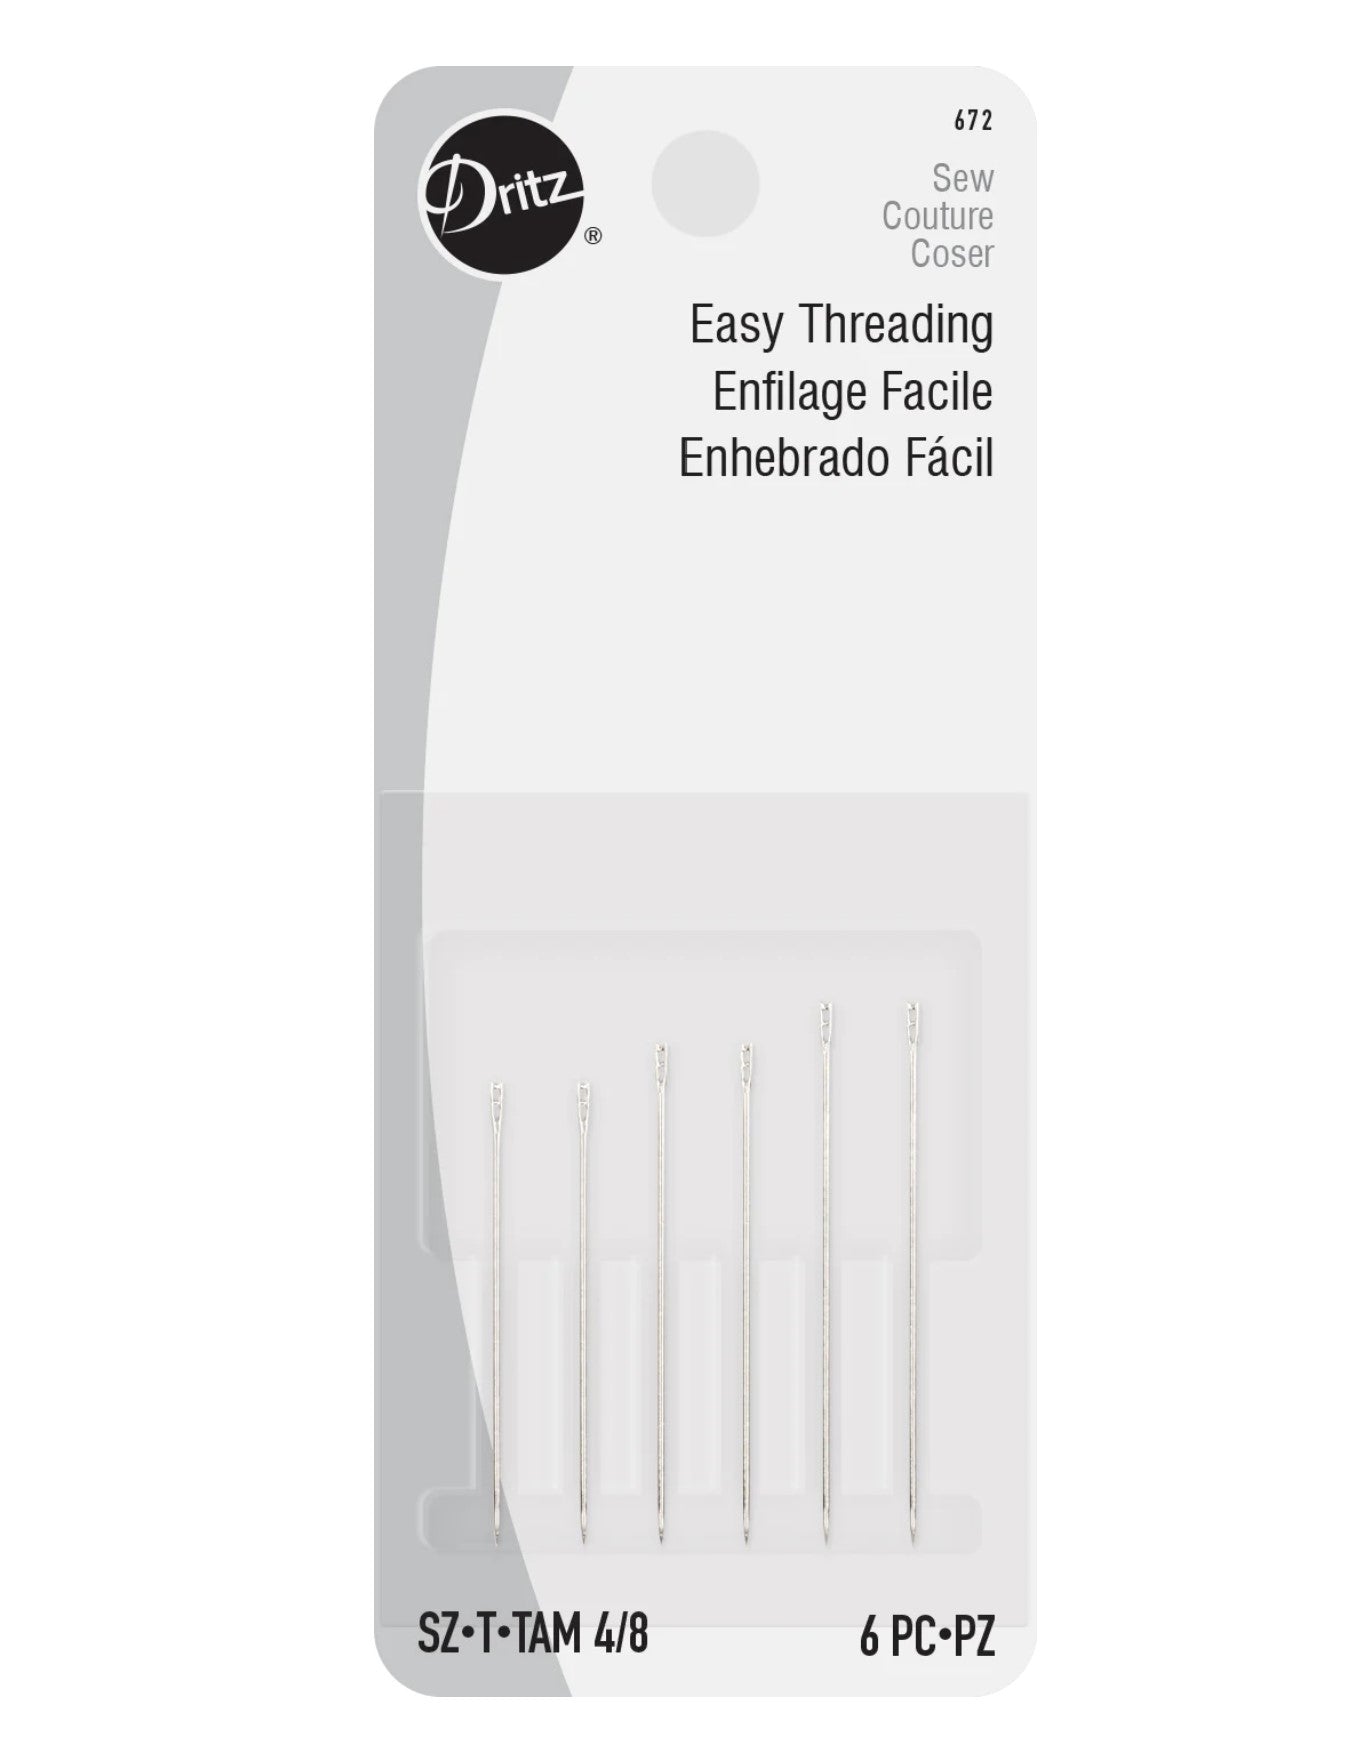 Easy-Threading Hand Sewing Needles (Sizes: 4 / 8) by Dritz®